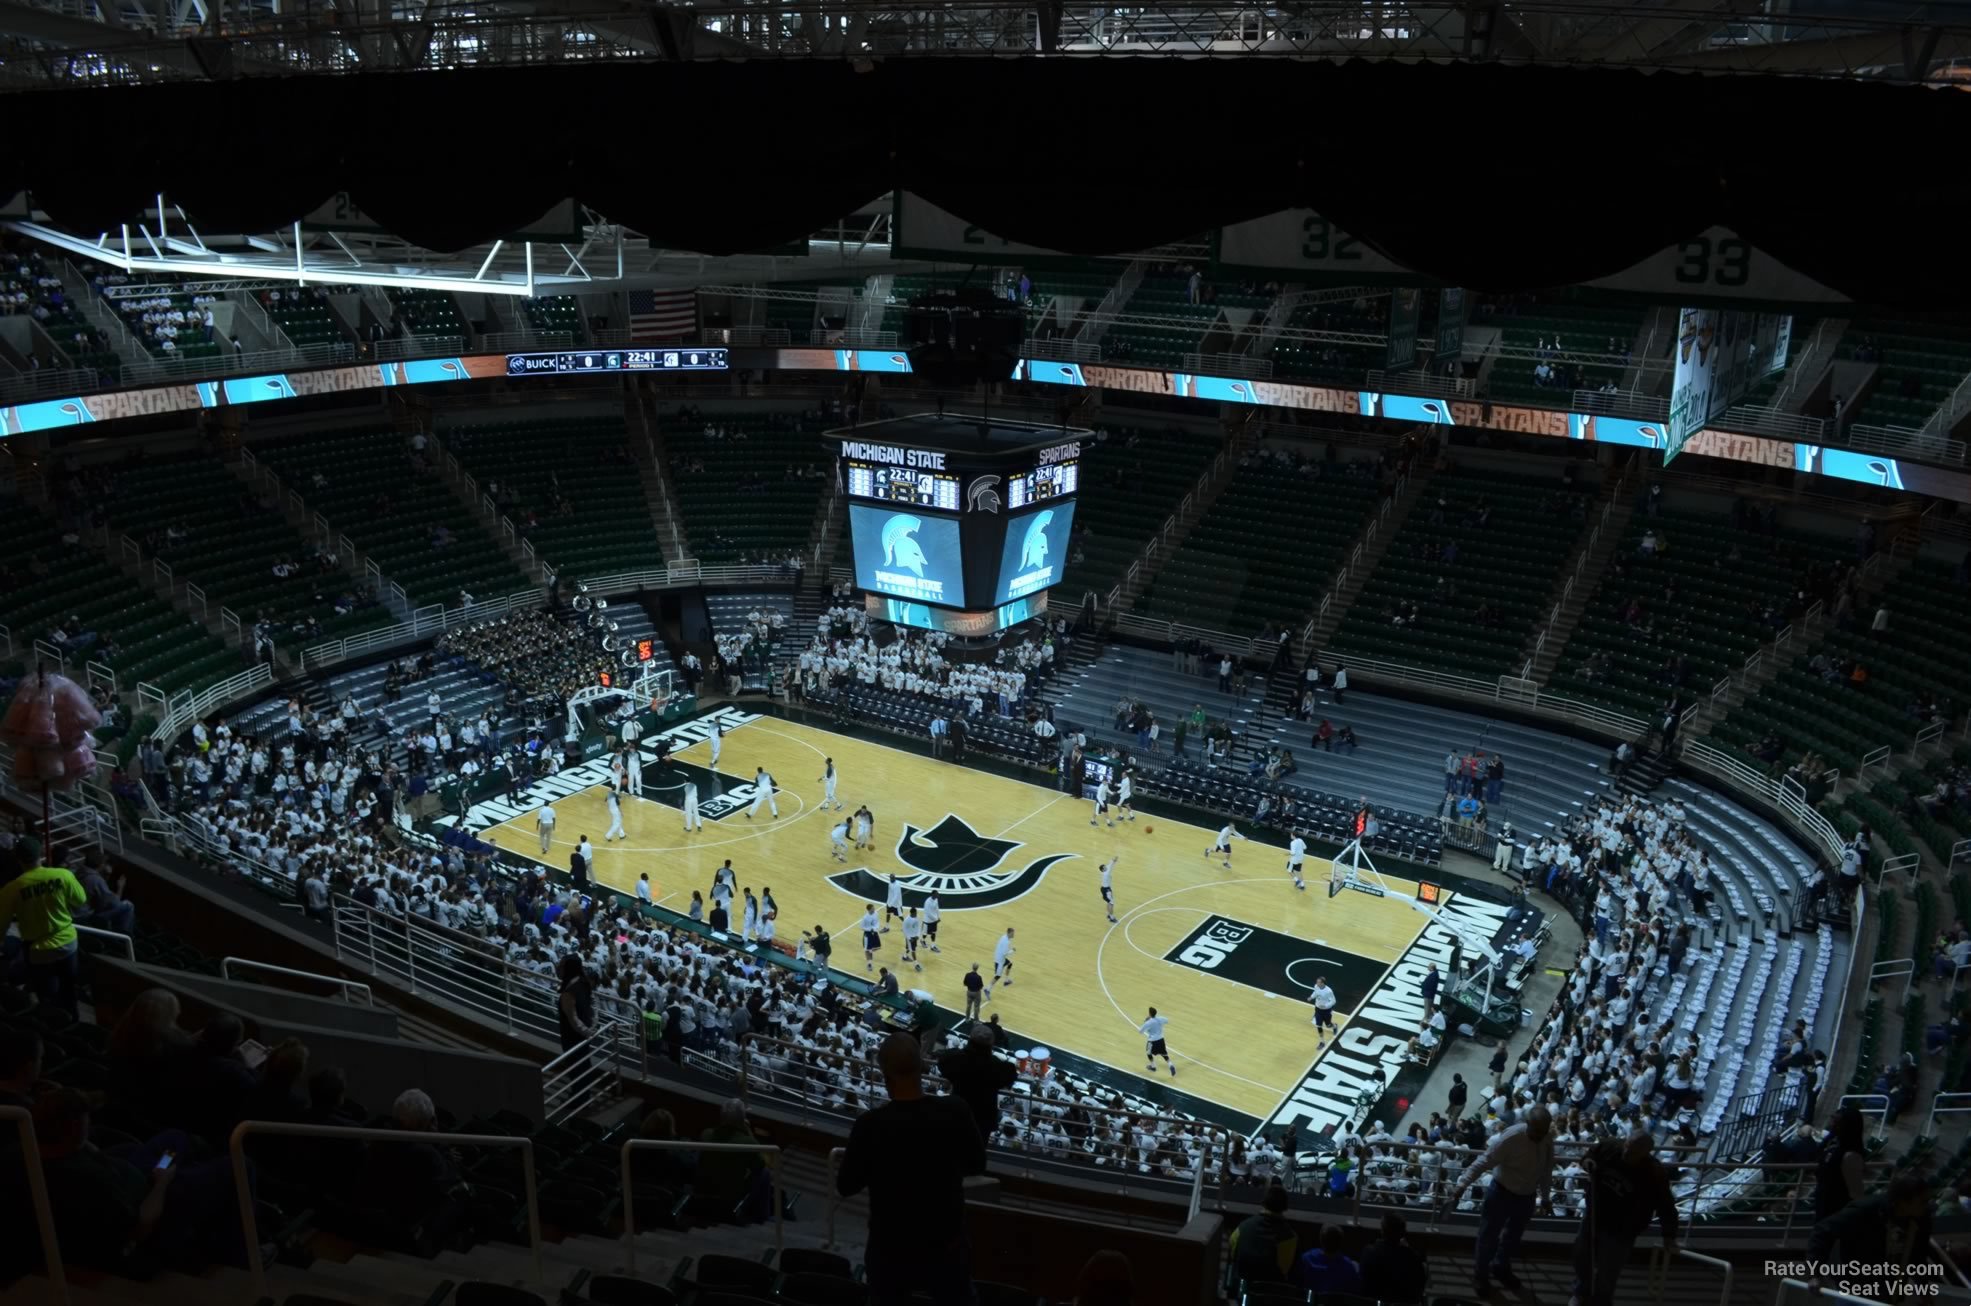 section 206, row 15 seat view  - breslin center